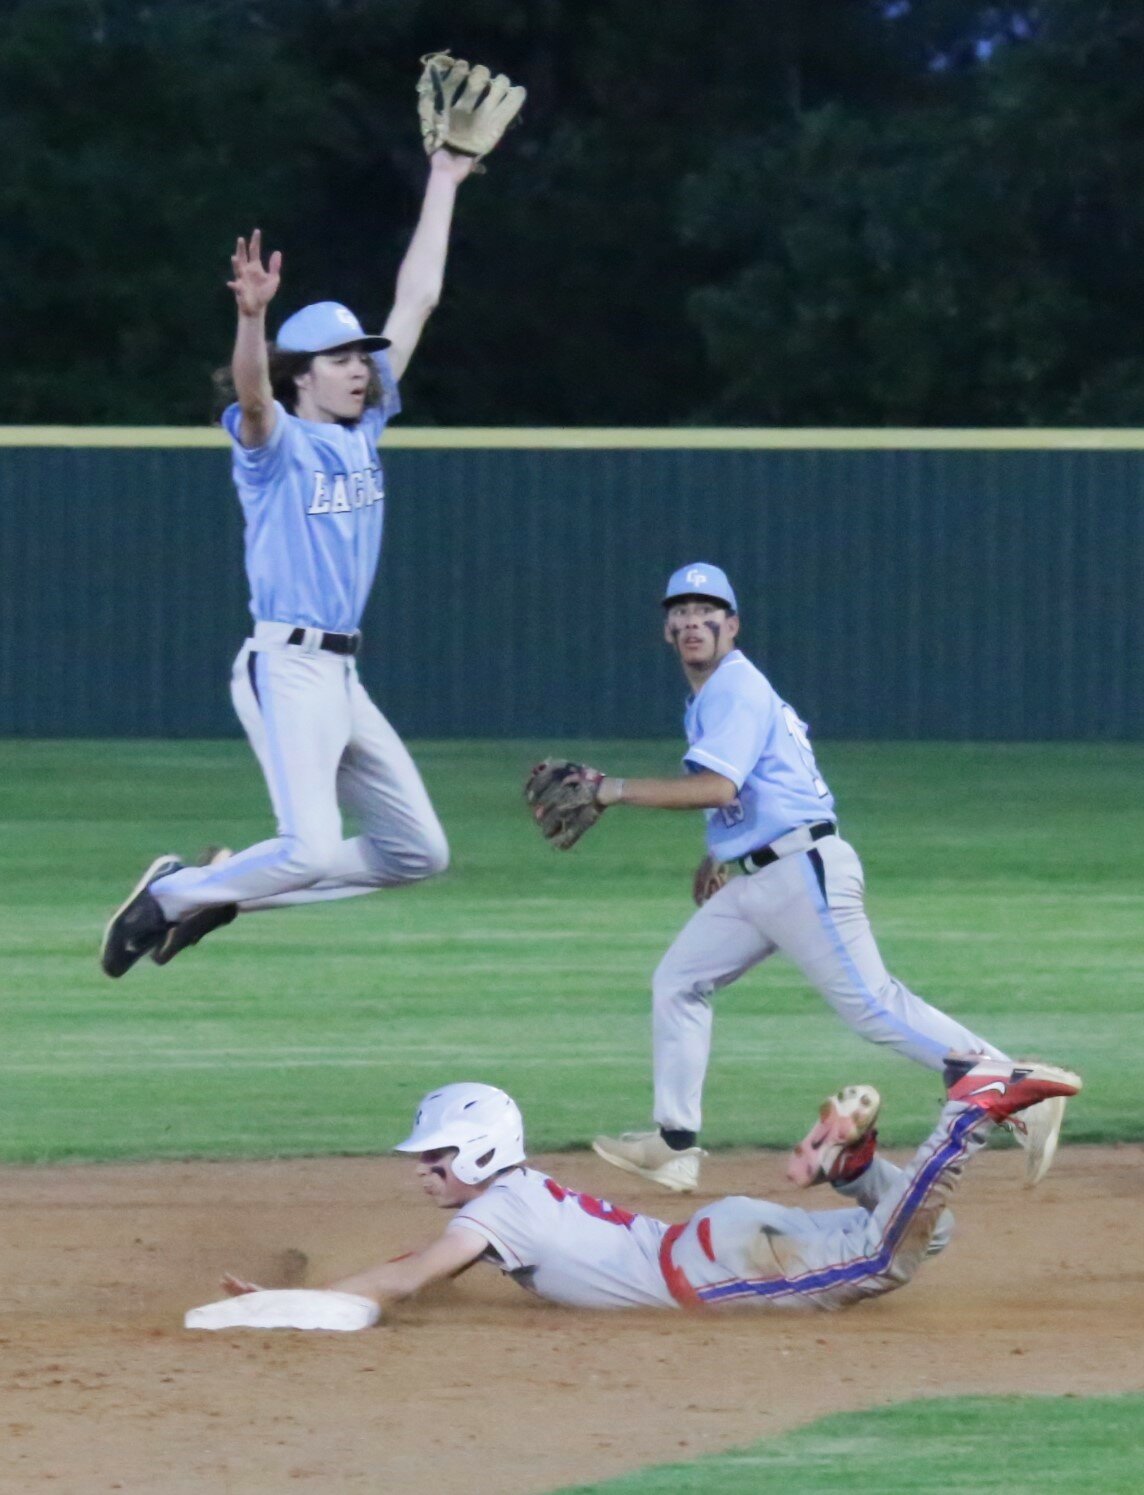 Michael Lacy executes a clean steal of second base while the Como-Pickton throw errantly heads into center field.